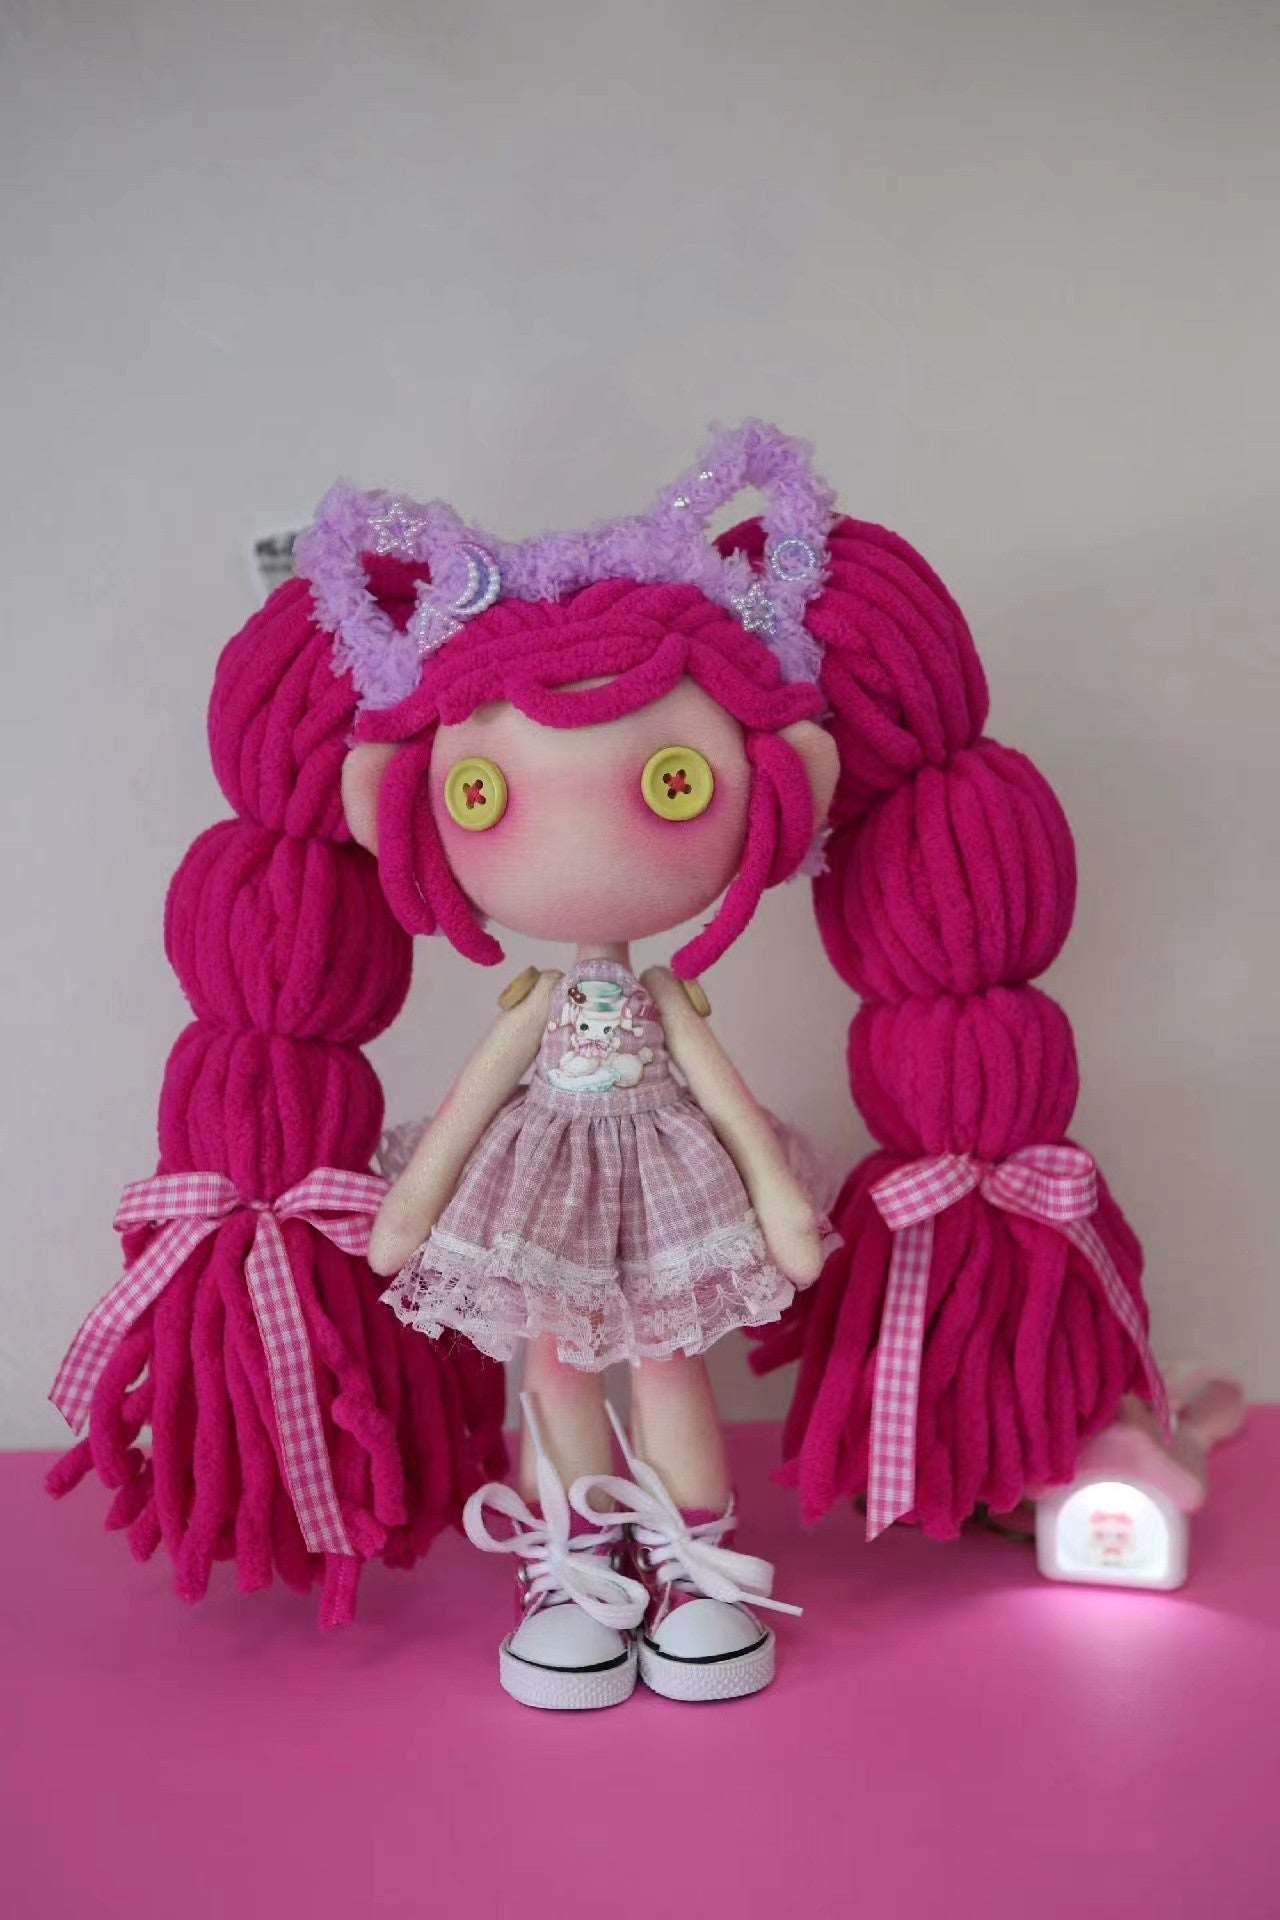 Artisan Crafted Doll Toys for Gifts